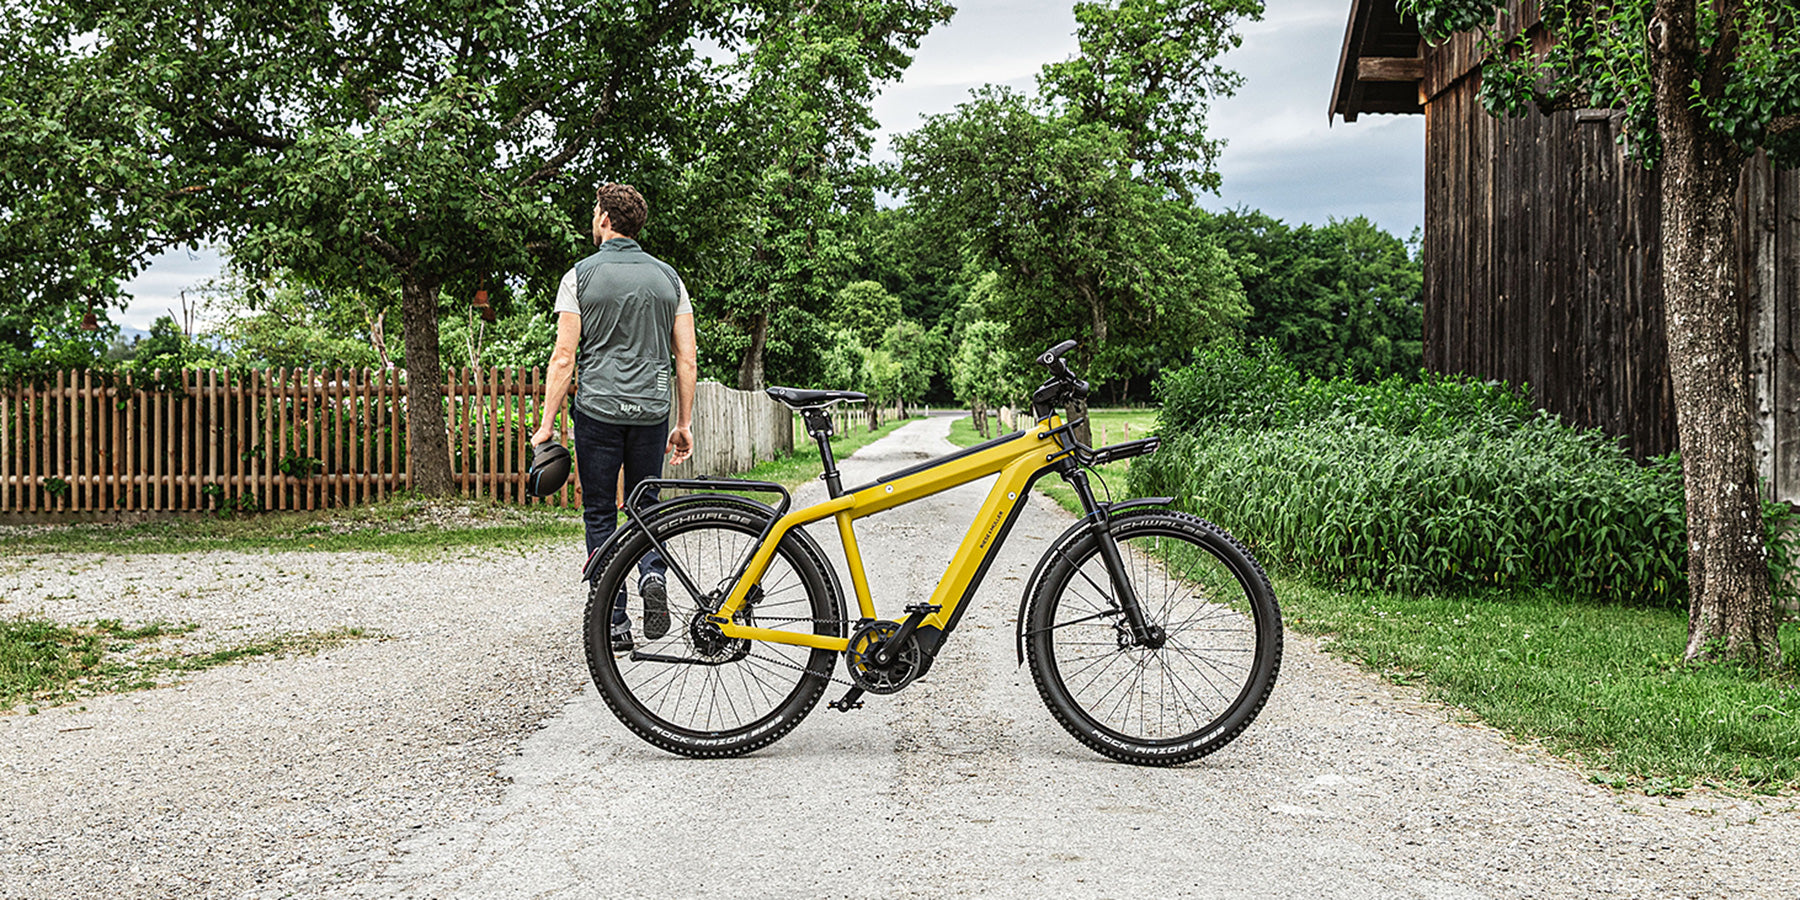 A Riese and Muller Supercharger electric bike